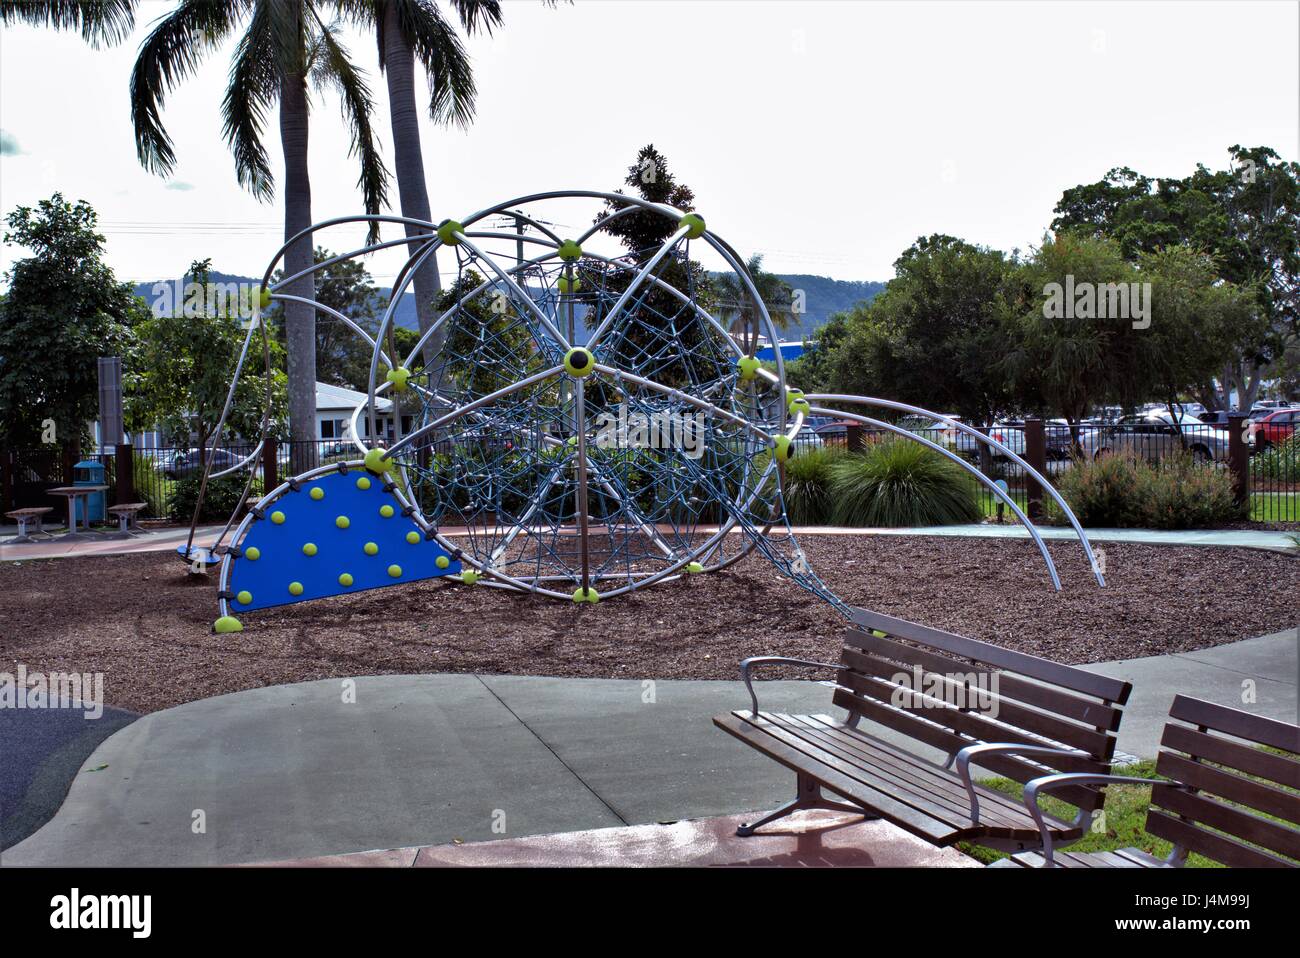 Kids park in Australian. Children park with rides made of metal and ropes, grass, trees, benches in view. Stock Photo